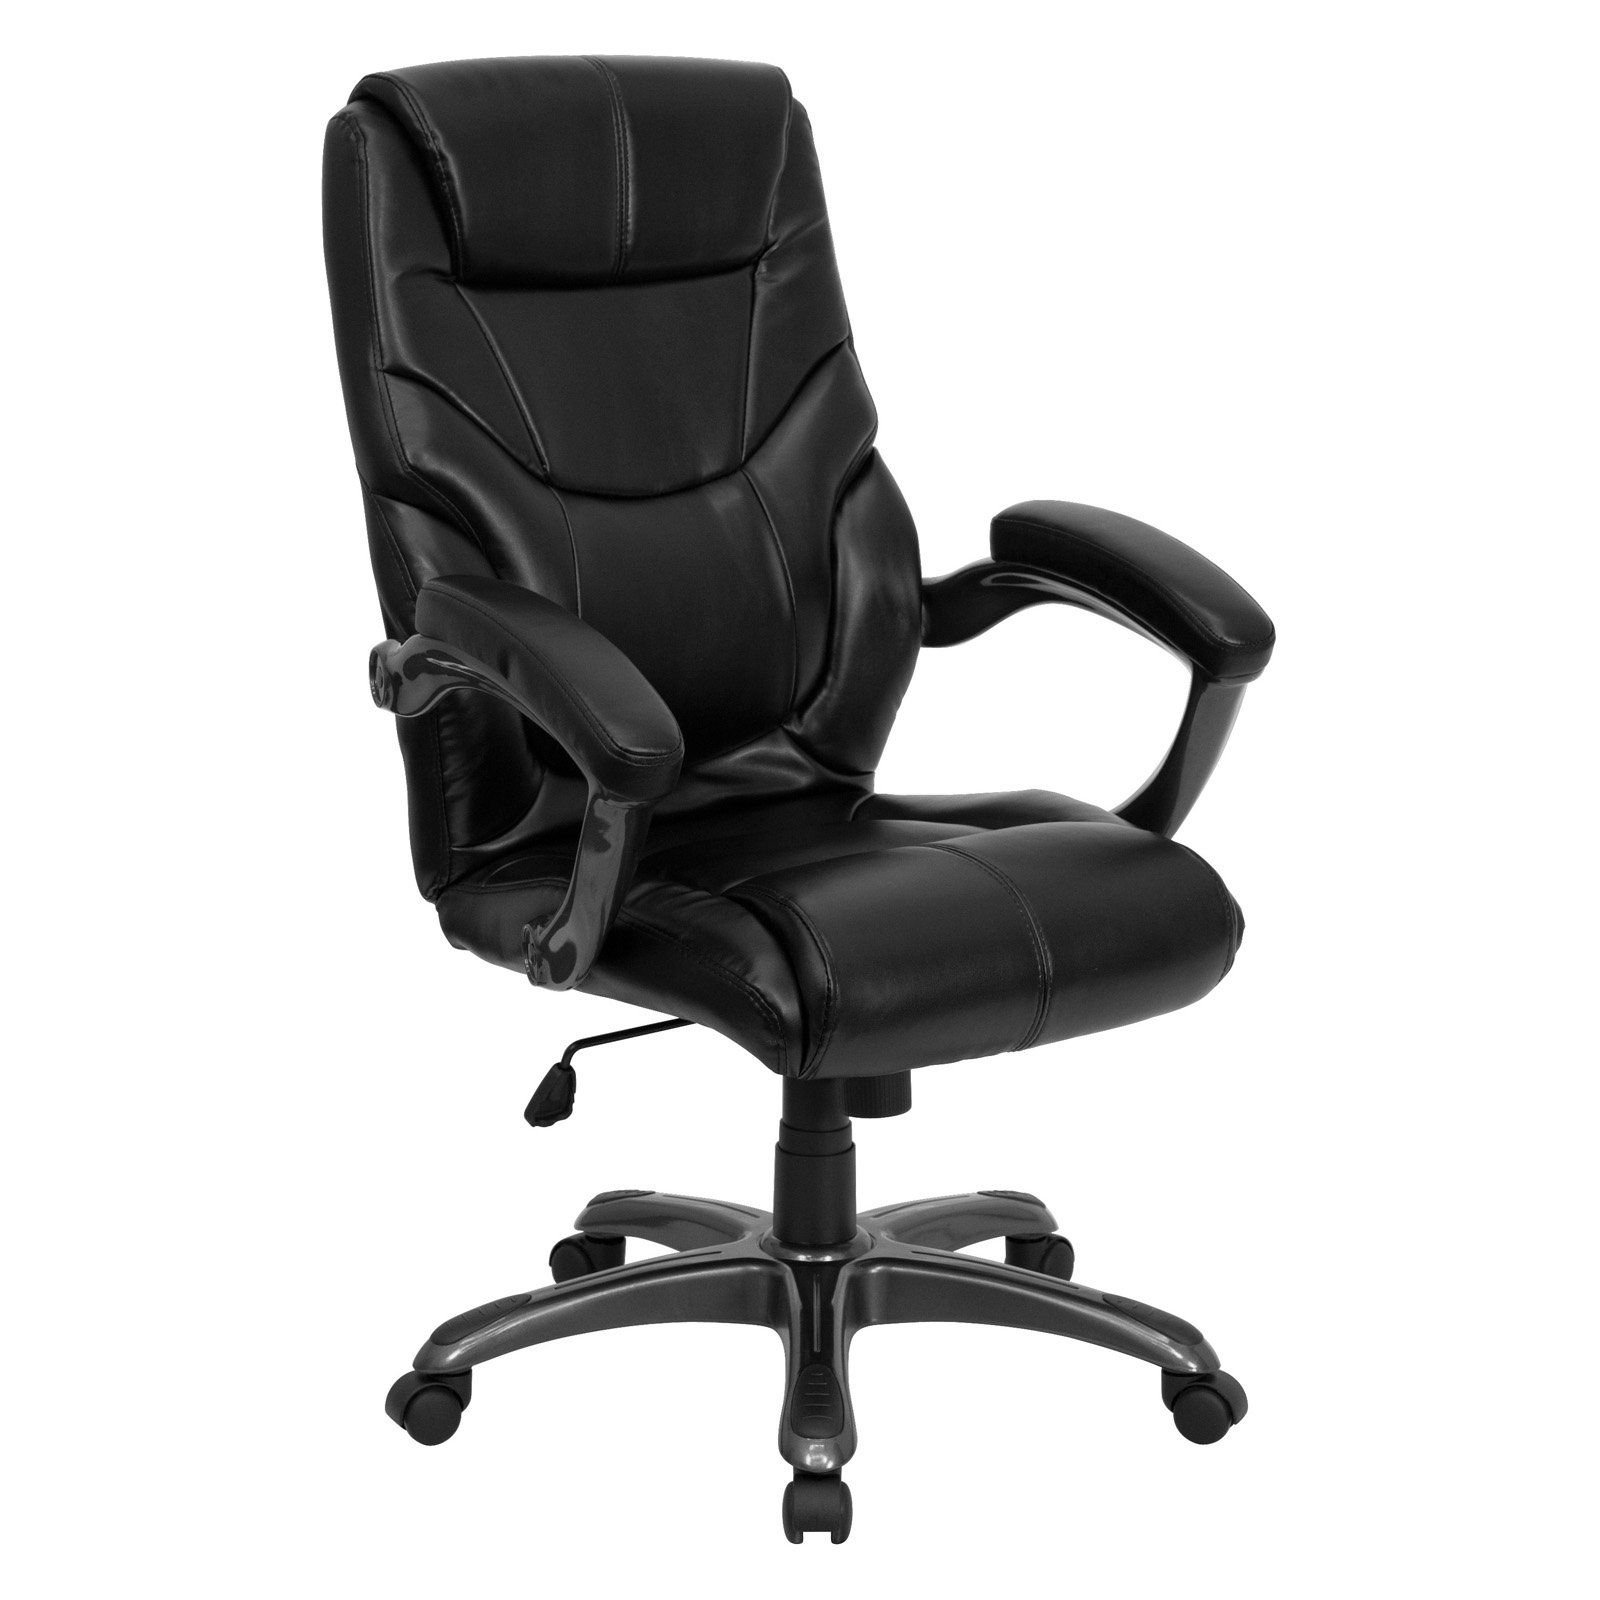 Contemporary Leather High-Back Office Chair, Black - Walmart.com